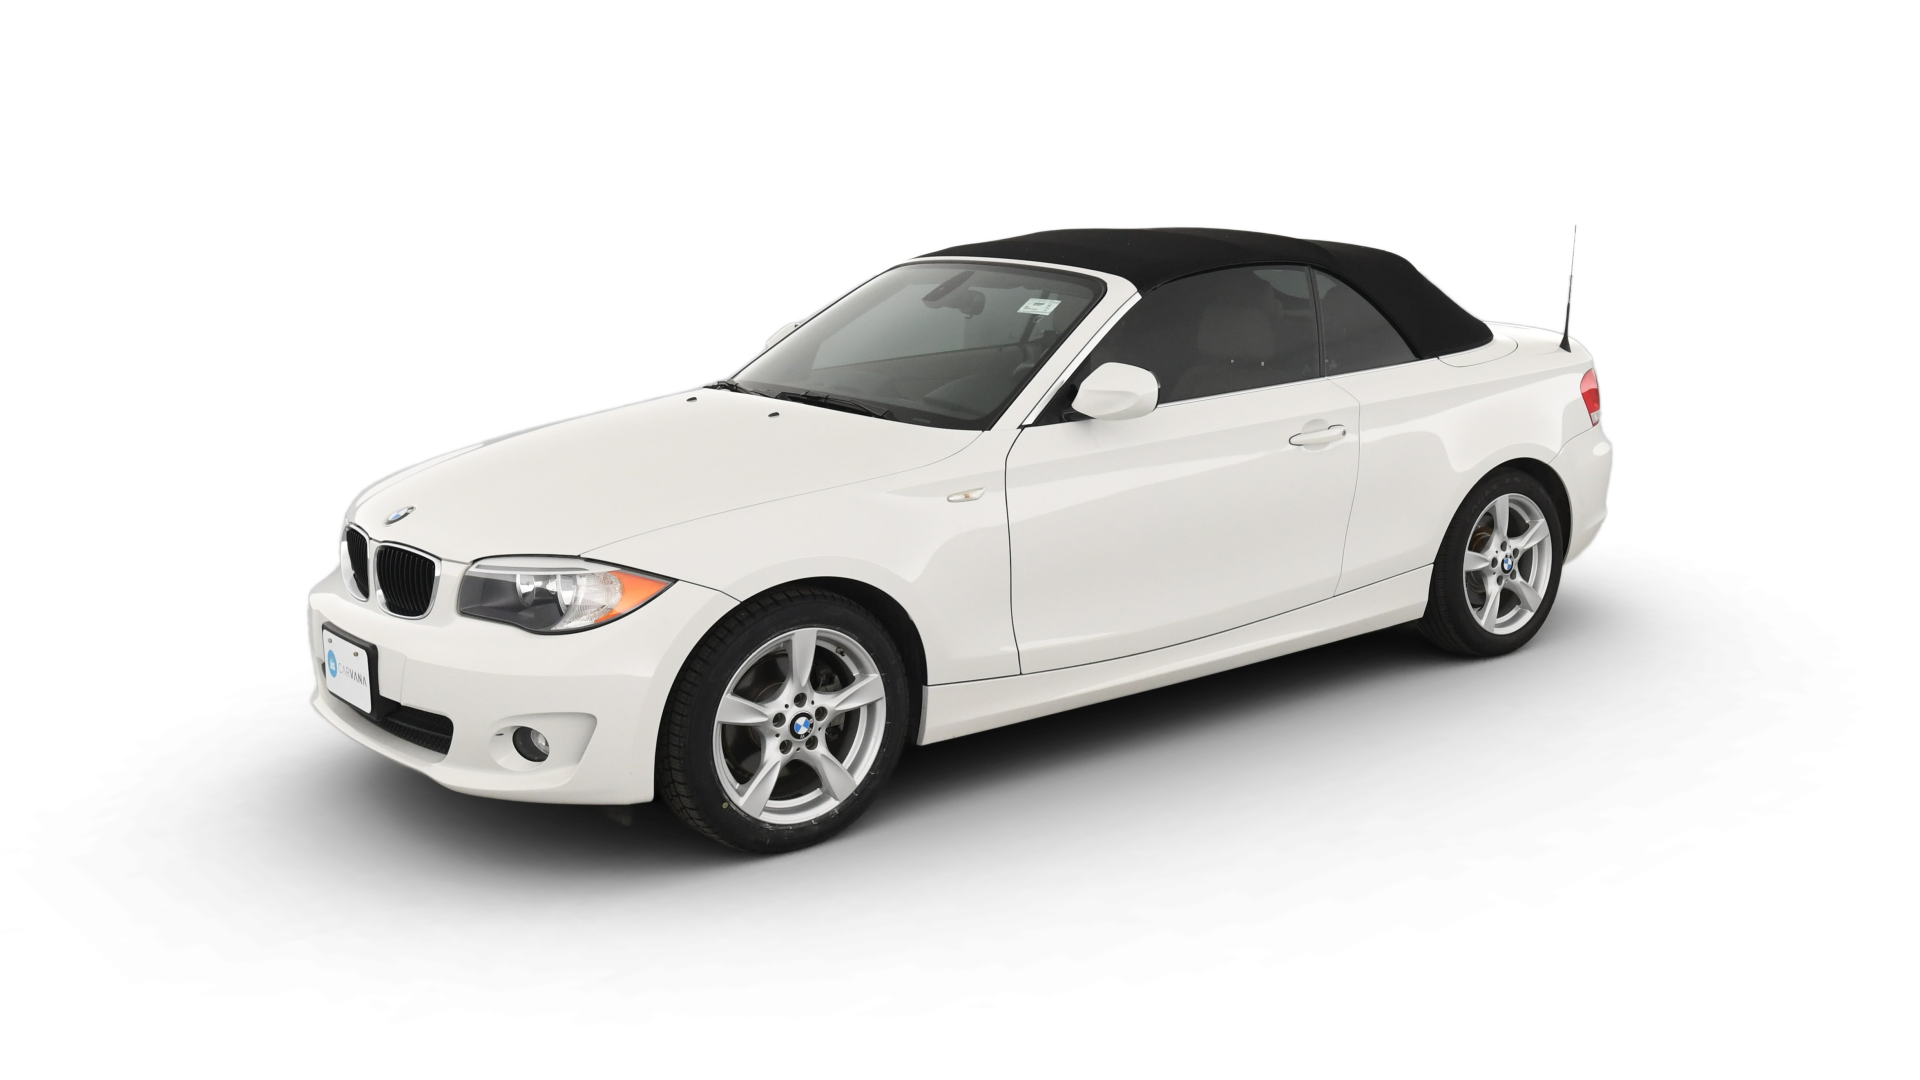 Used BMW 1 Series for Sale Online